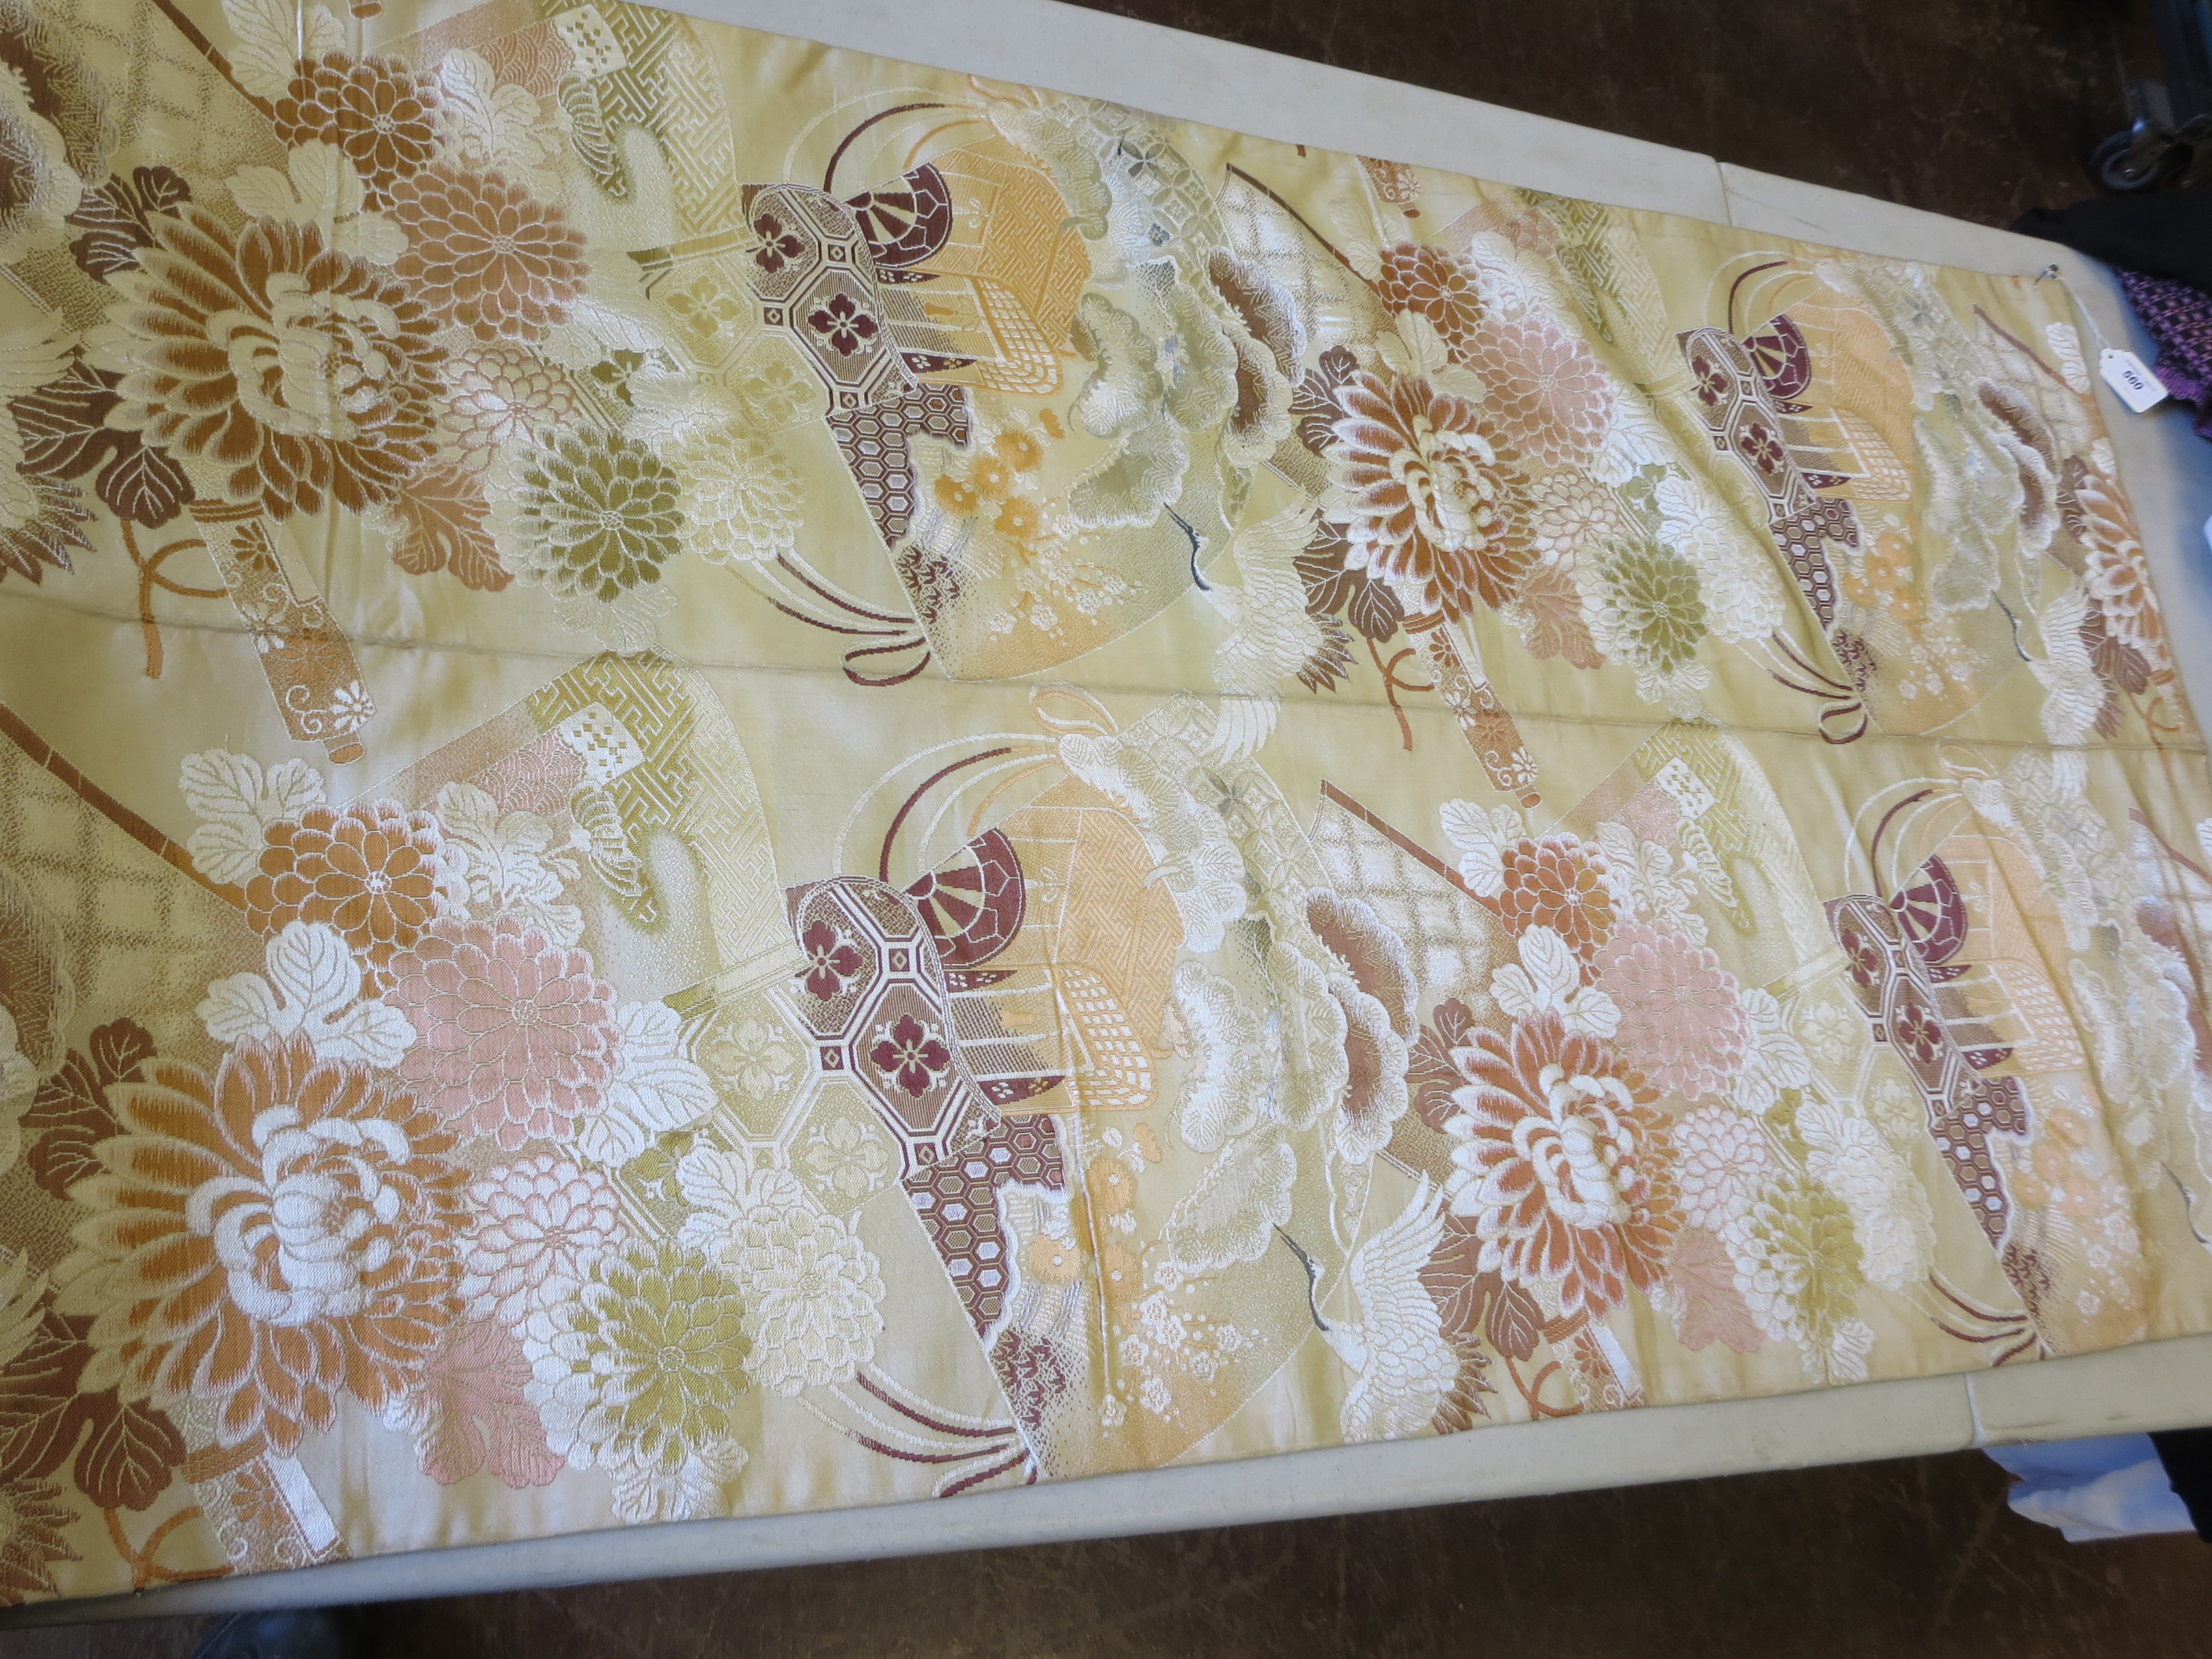 A part roll of Japanese metallic brocade, fan and flower pattern on a cream ground